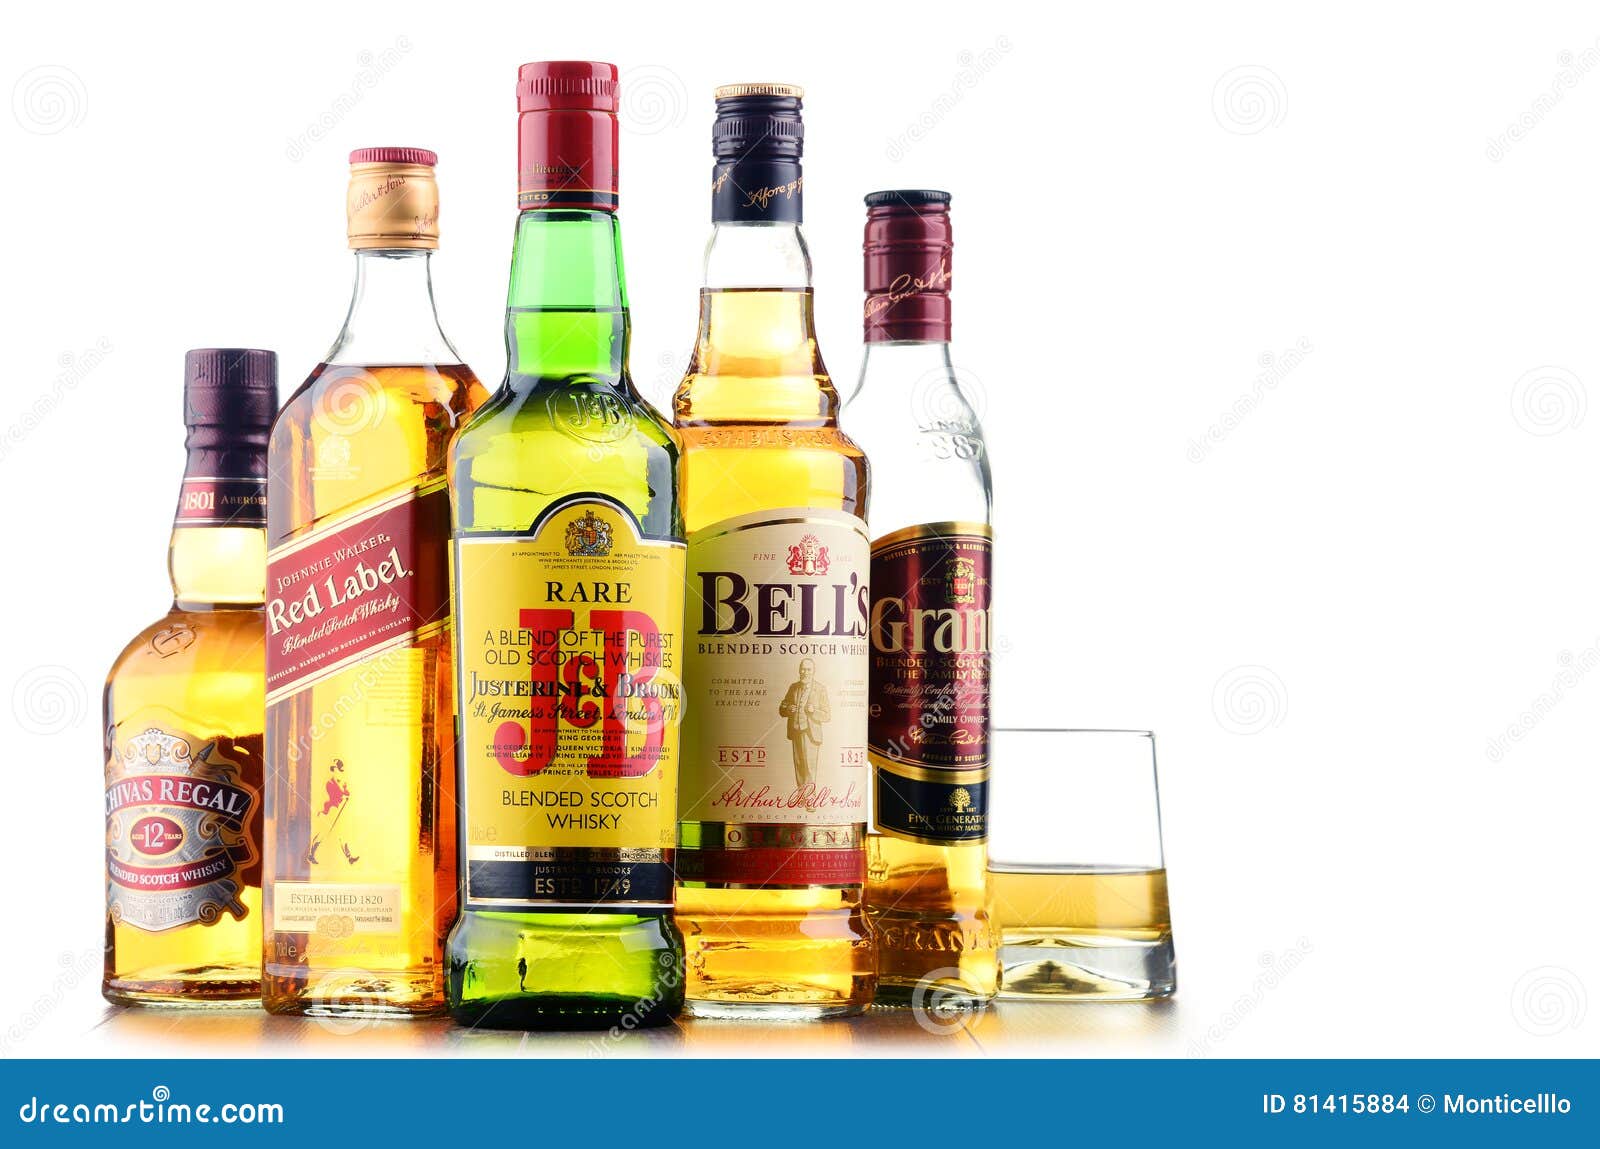 Composition With Bottles Of Popular Whiskey Brands Editorial Stock Image - Image of johnnie ...